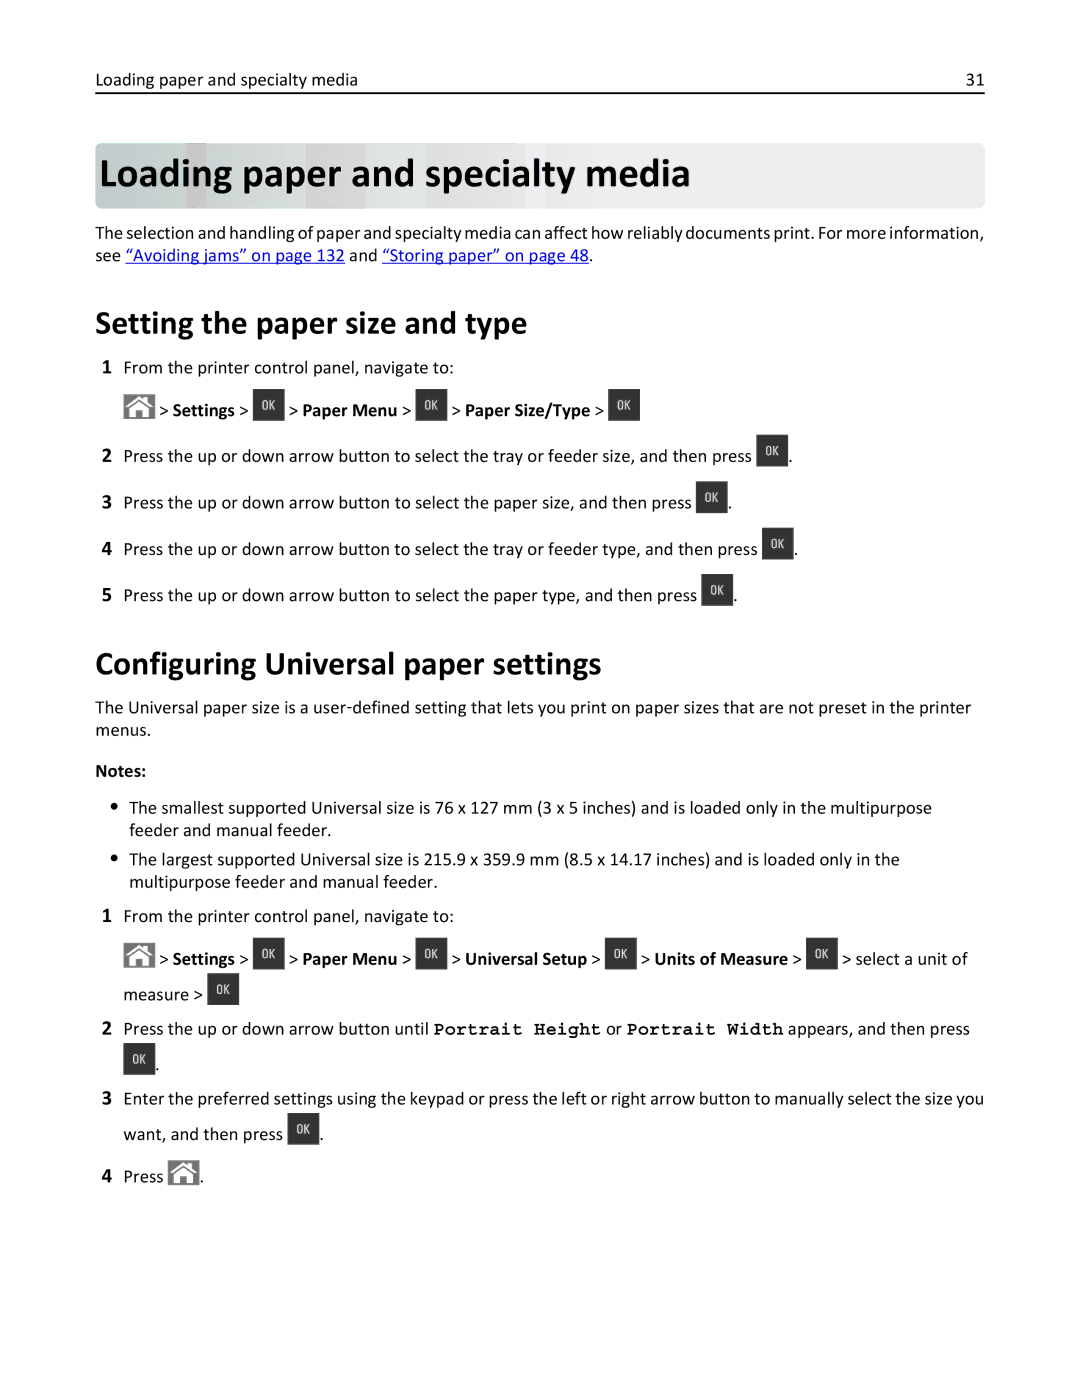 Lexmark CS410 Loading paper and specialty media, Setting the paper size and type, Configuring Universal paper settings 